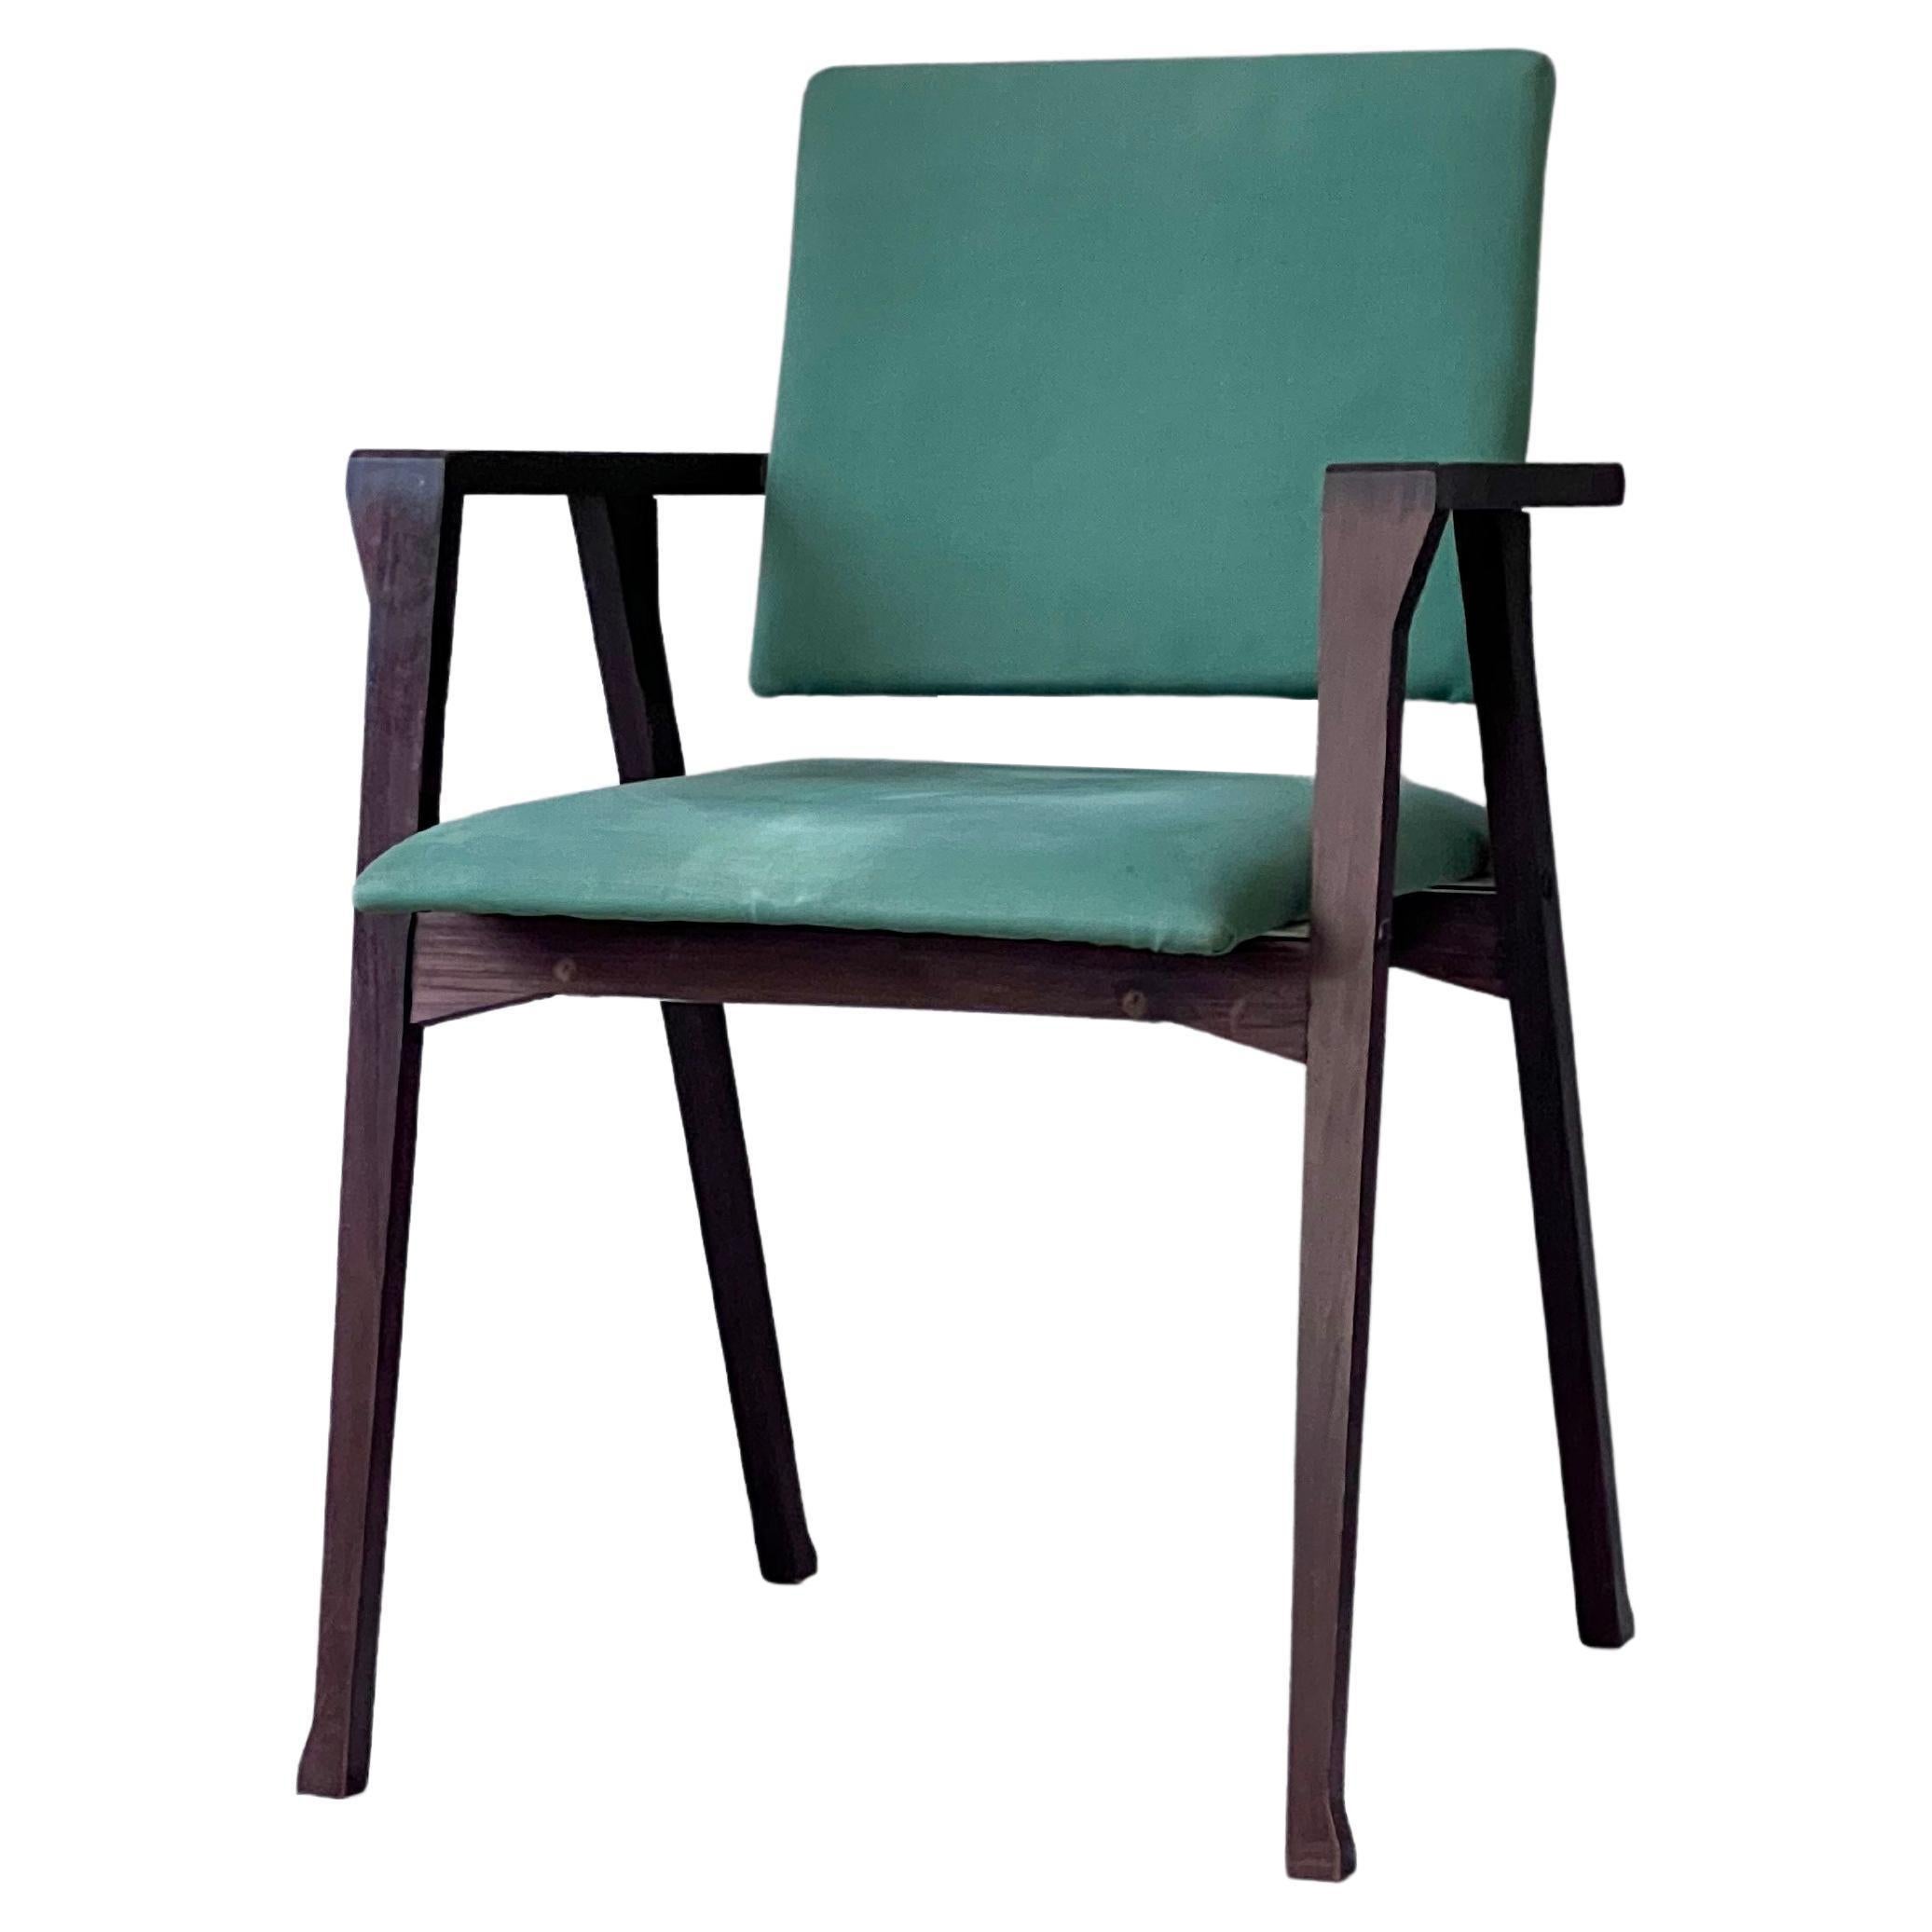 Italian Mid-Century Collectible Armchair, Dining Chair, Luisa by Franco Albini